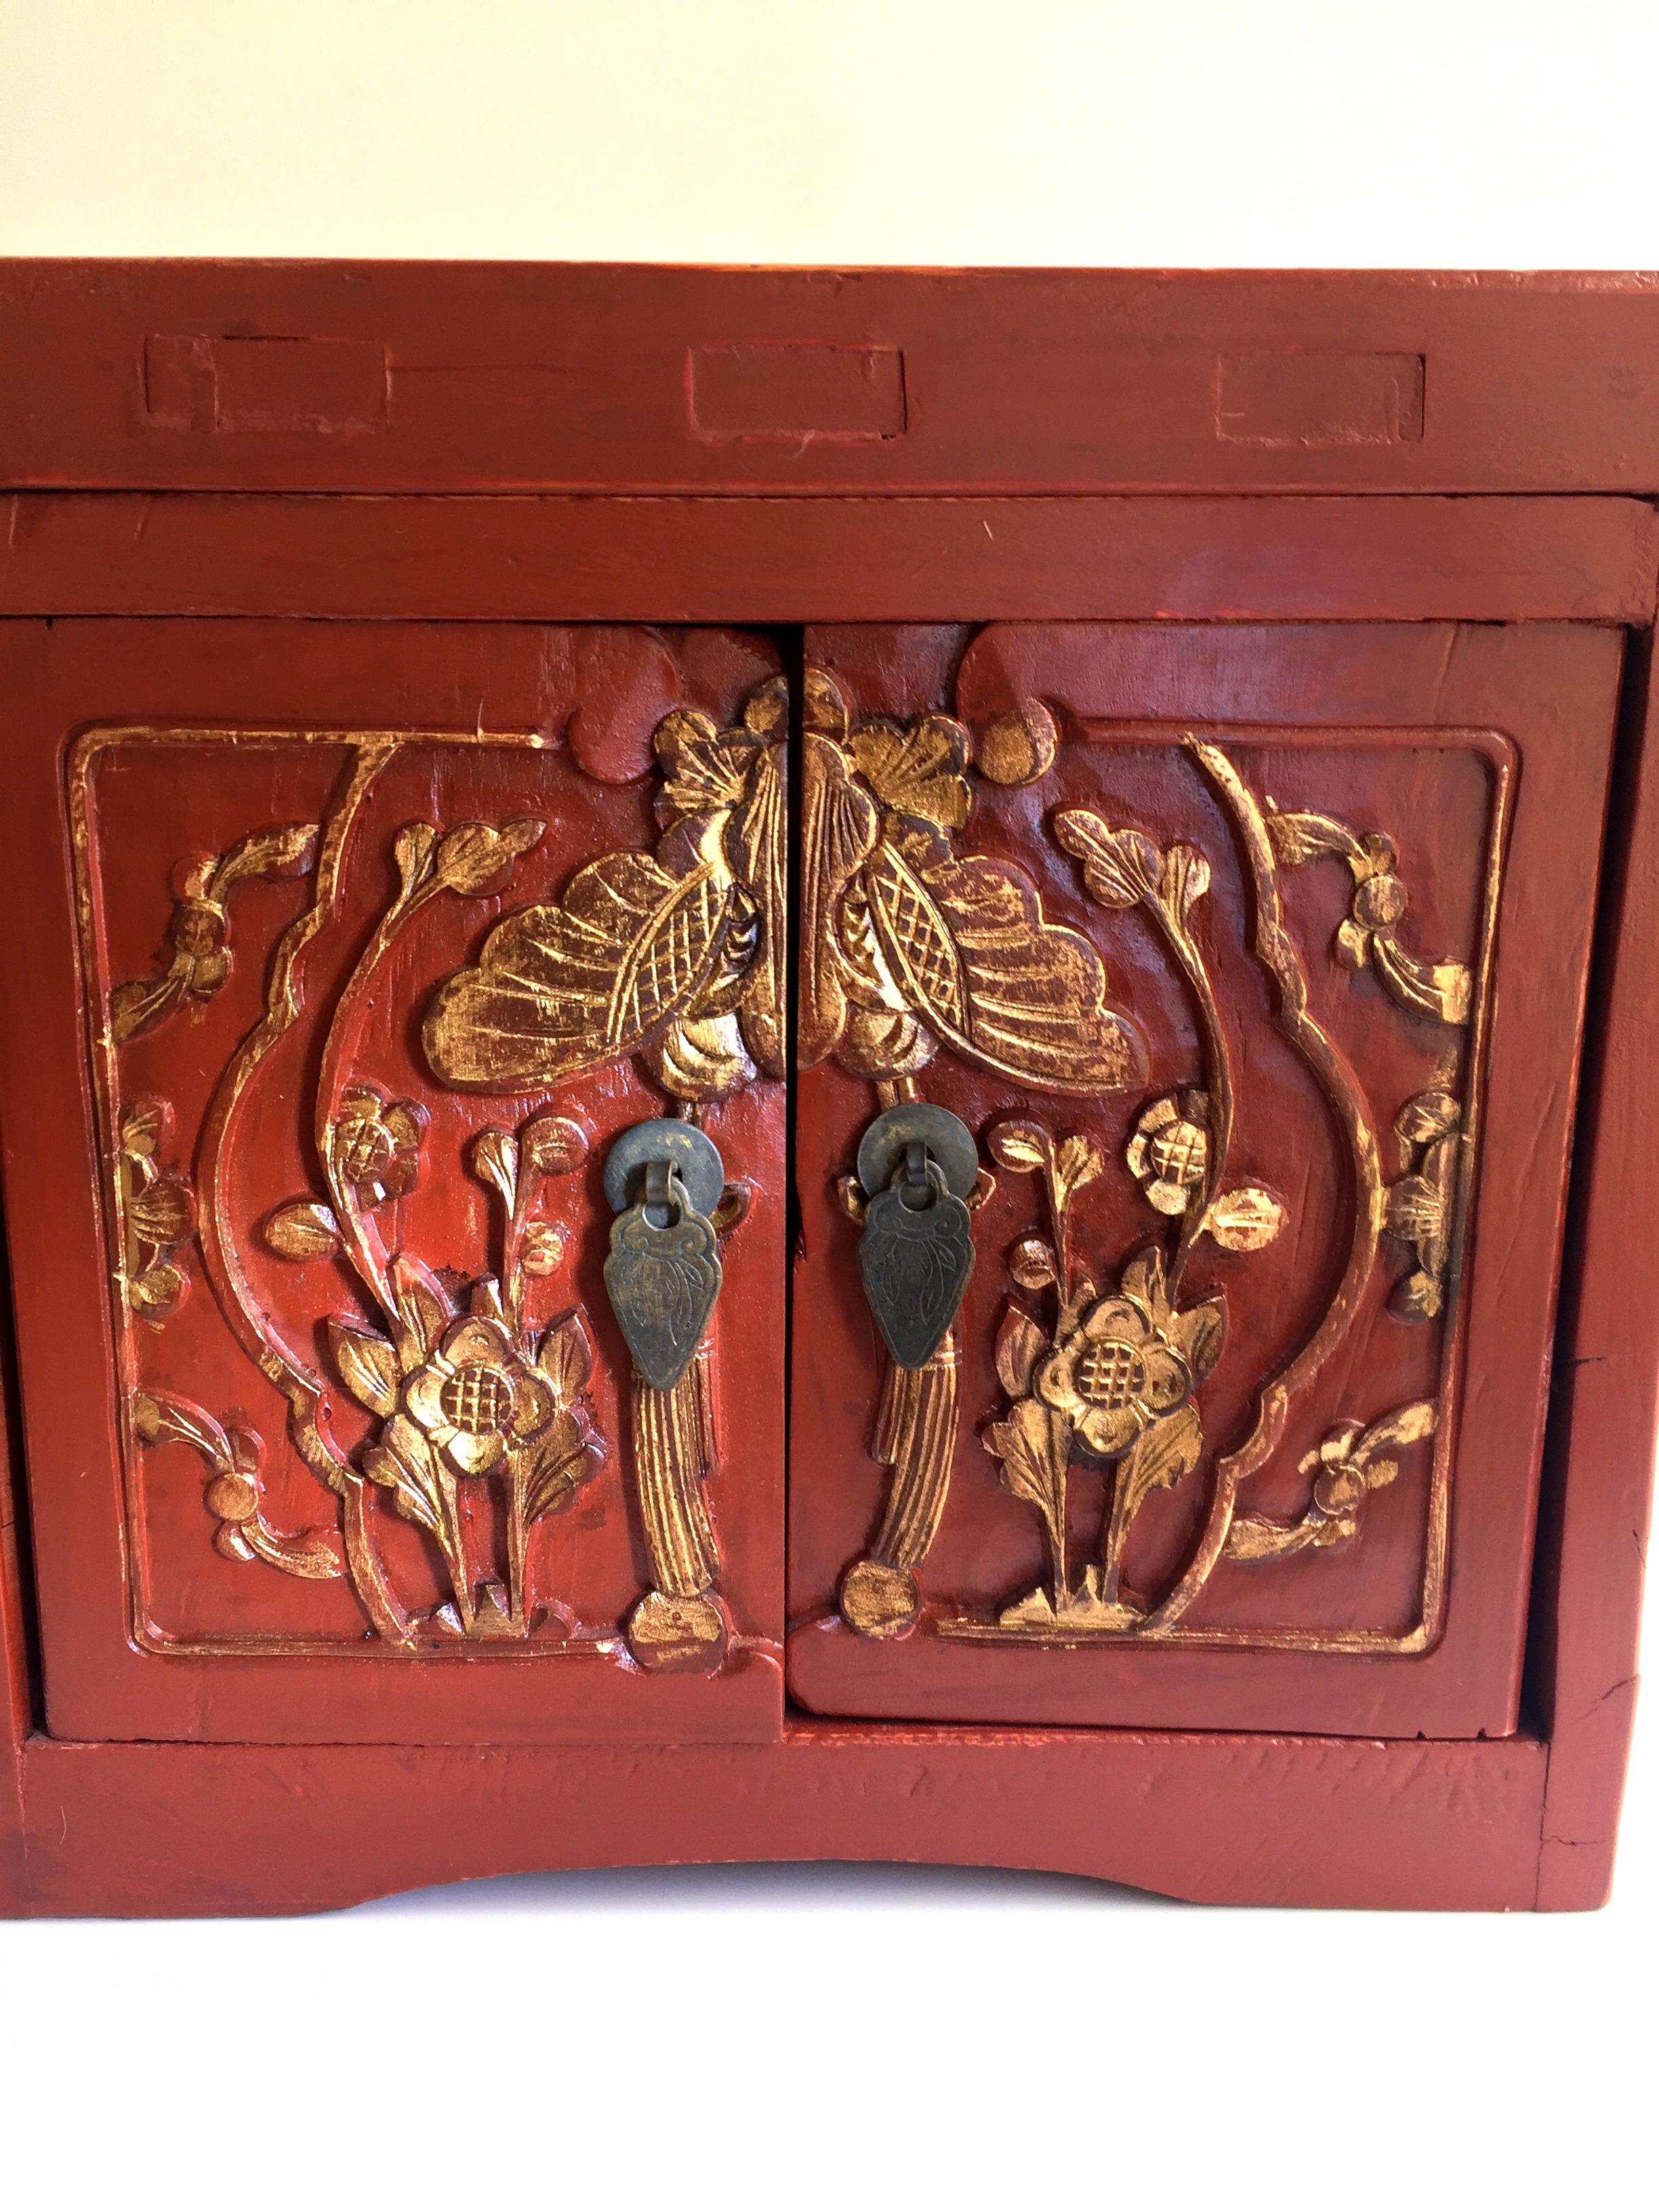 Hand-Painted Antique Chinese Jewelry Box, Red Lacquered